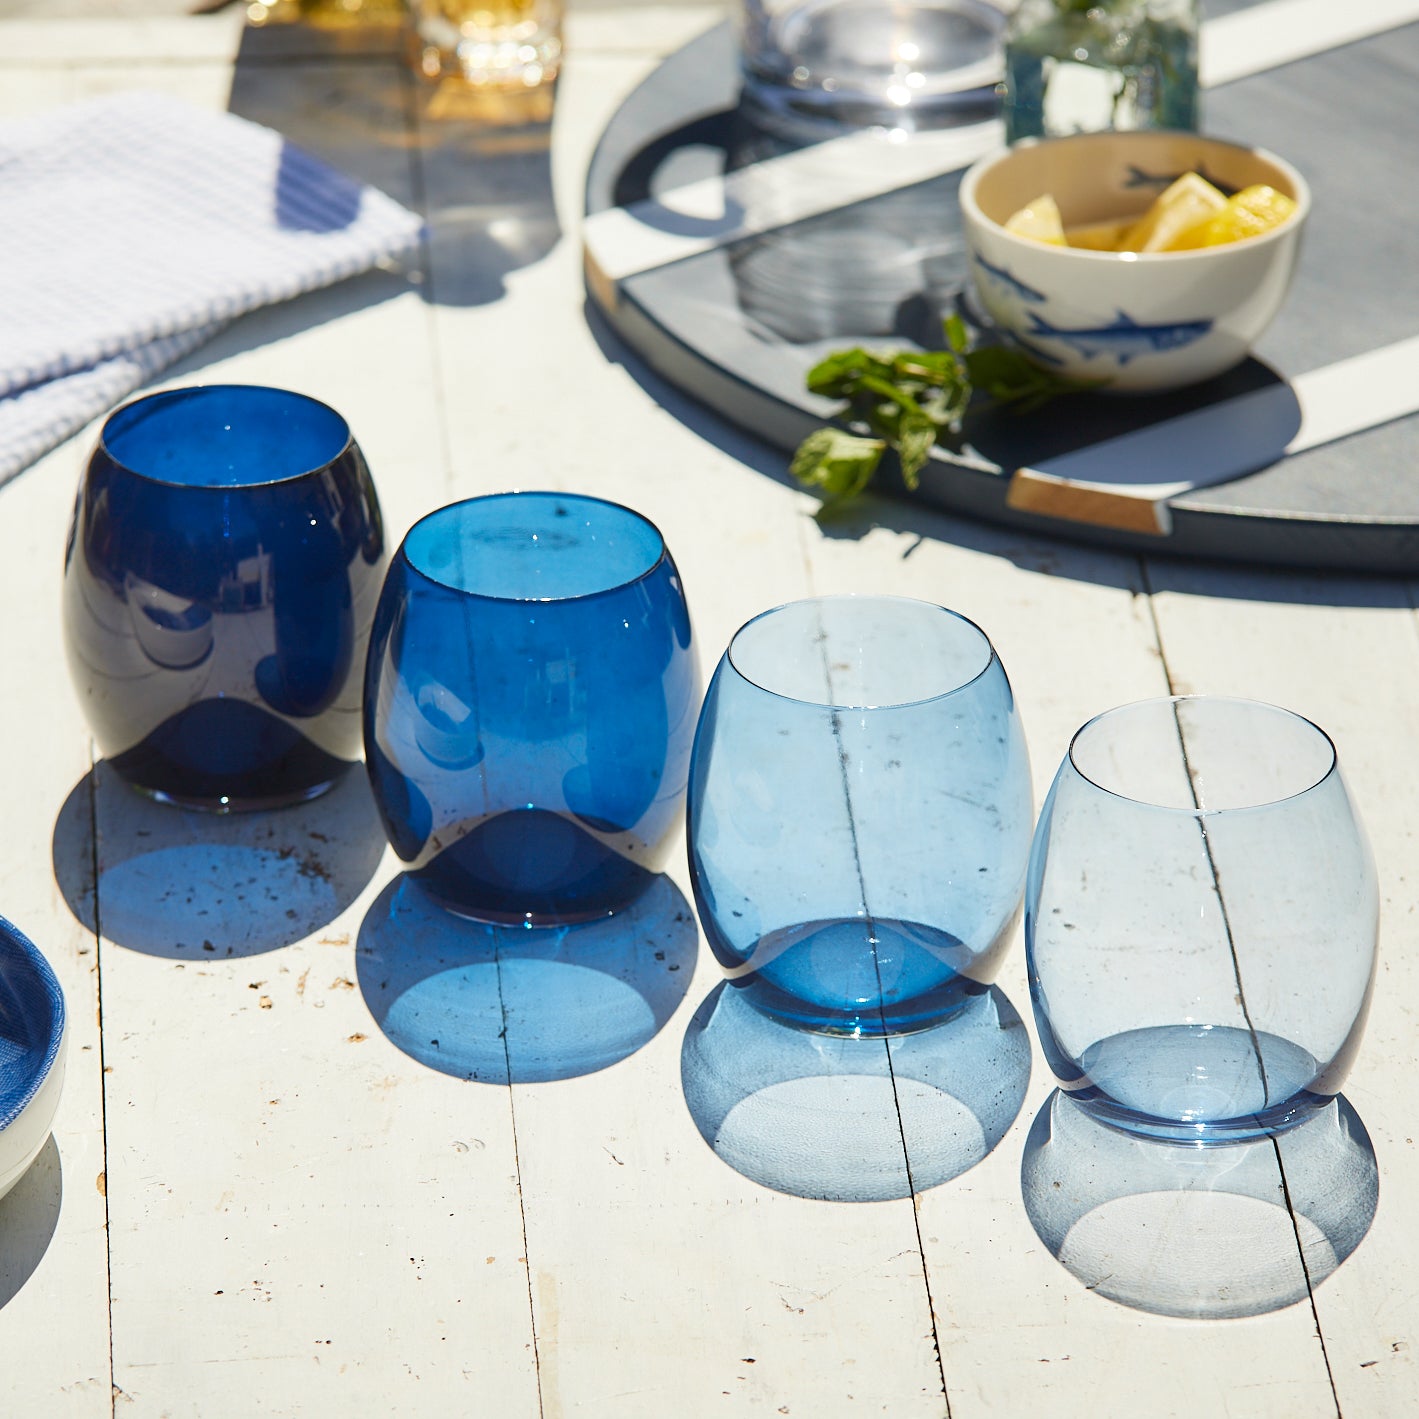 A Host With the Most Bundle from Caskata, which includes a set of four Blue Lobster Small Plates, four Les Nuages Tumblers with a blue gradient, a clear glass Les Nuages Pitcher with a blue handle, and blue lobster napkins.